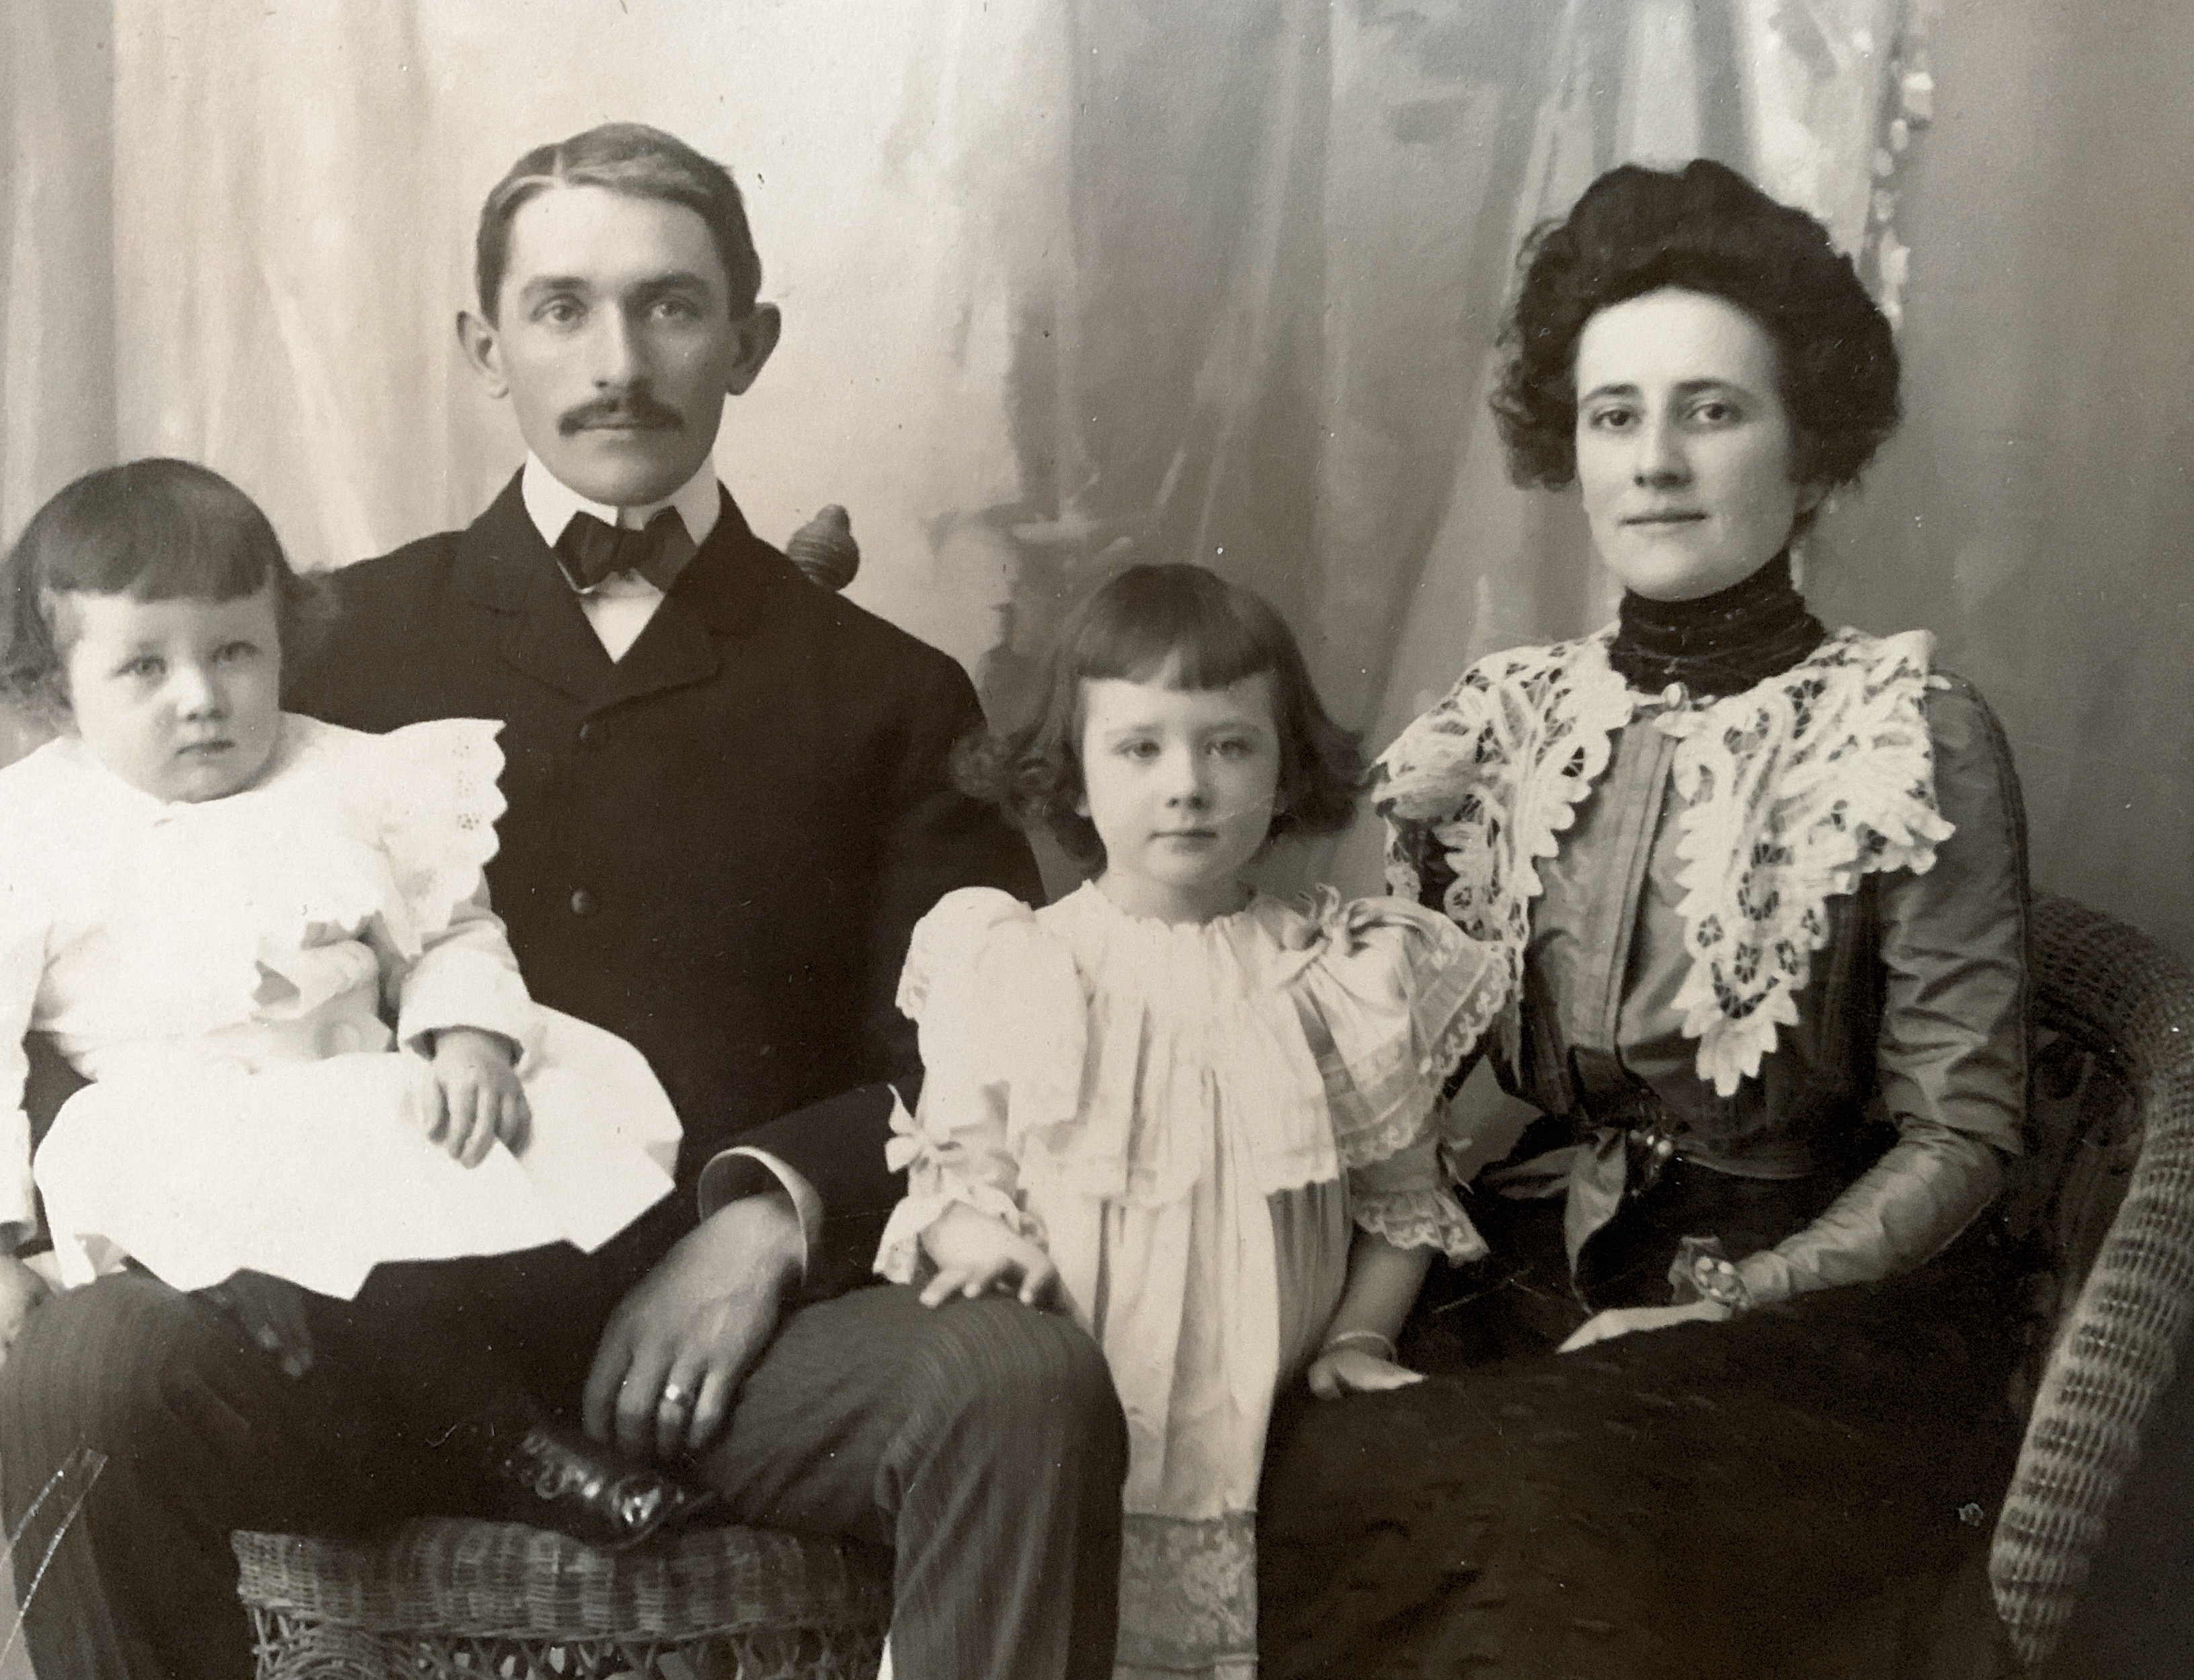 Edward Bartholomew Corley and Jessie Collison Corley with 2 oldest children, Connie and Roy